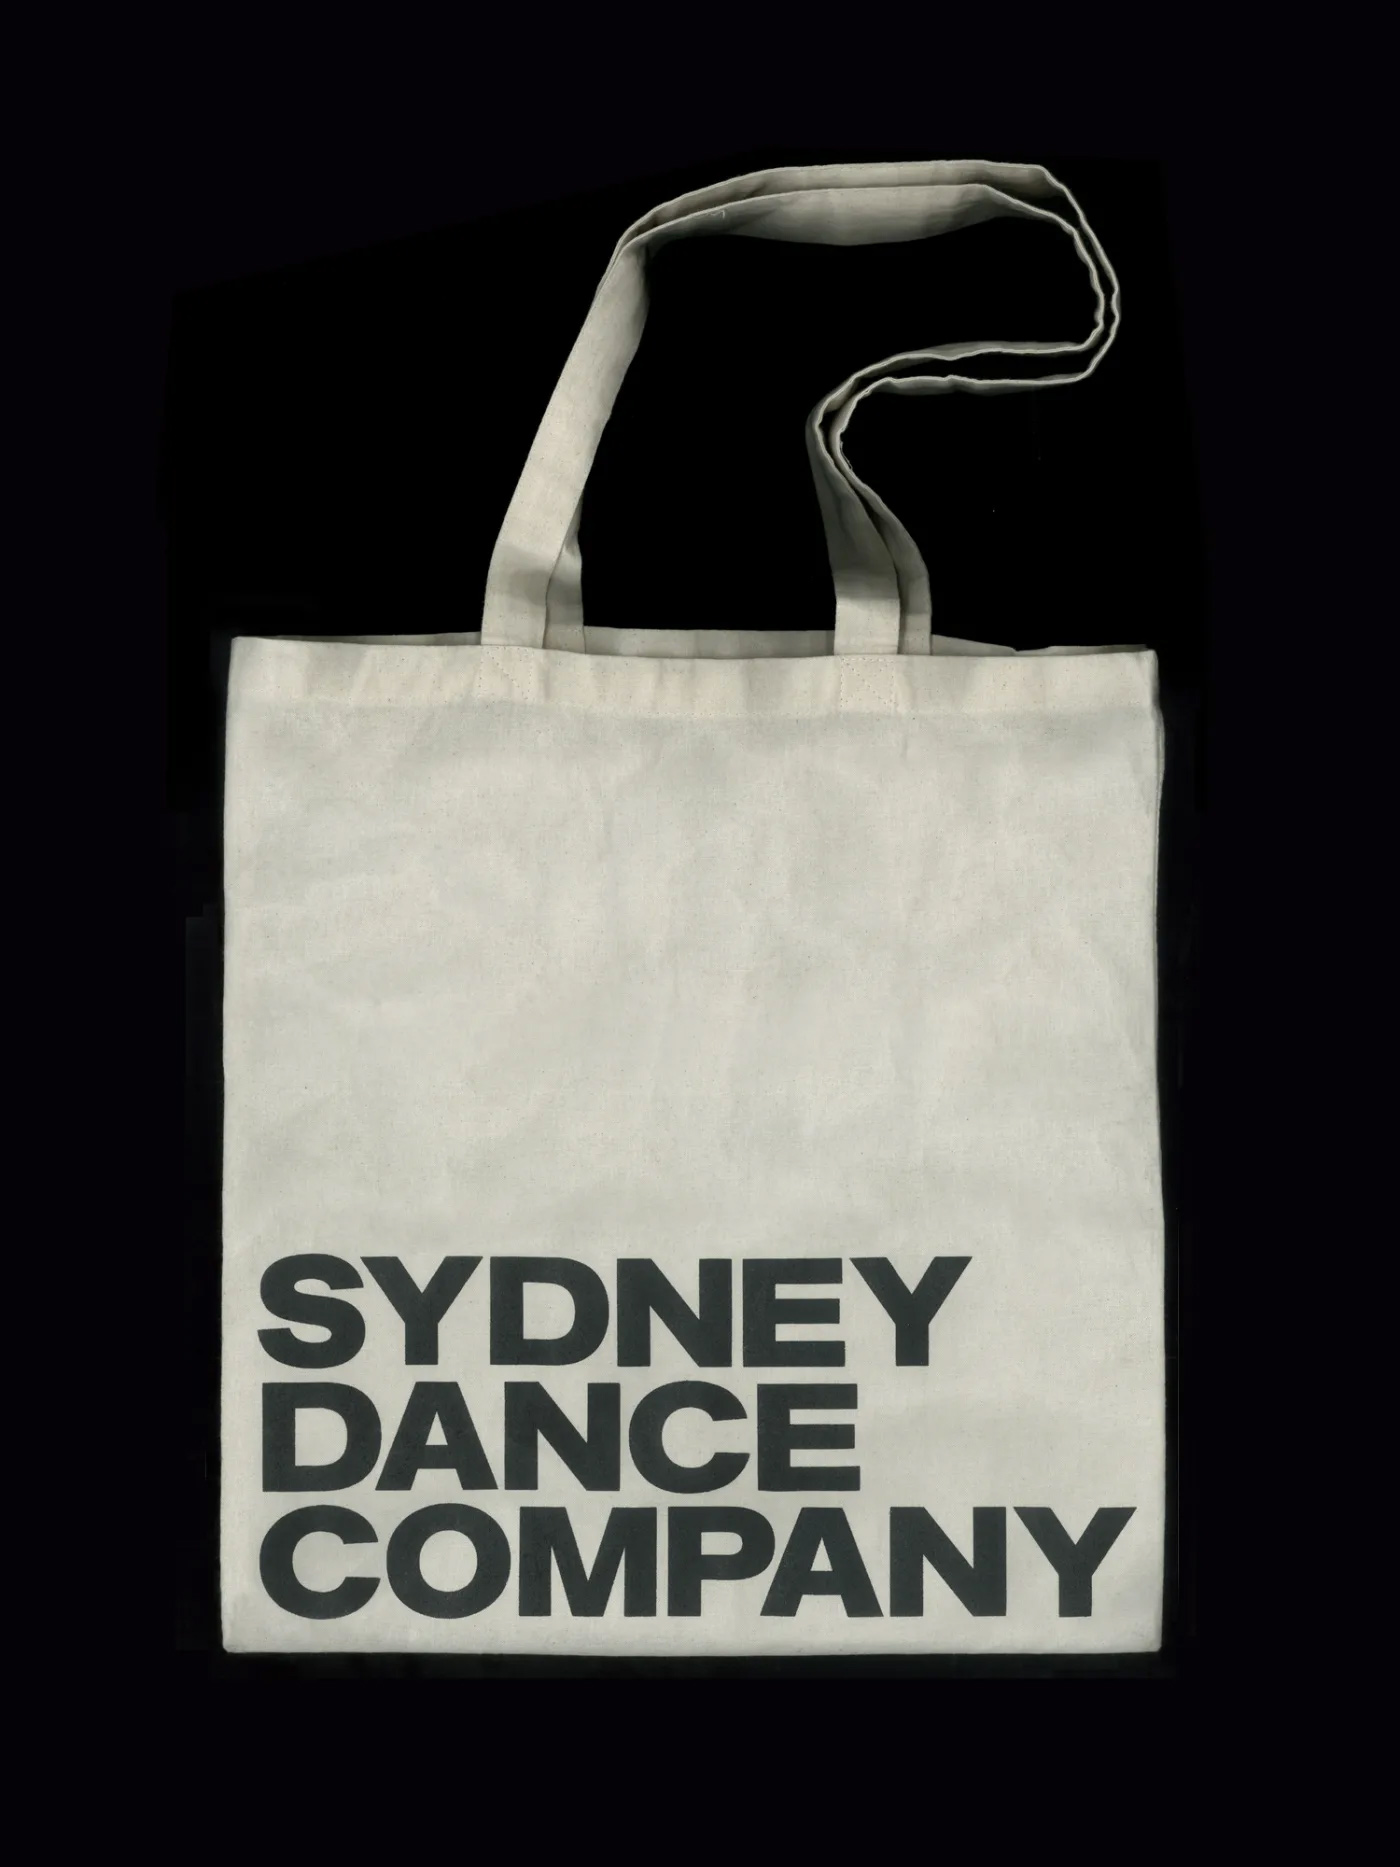 New Logo and Identity for Sydney Dance Company by Maud